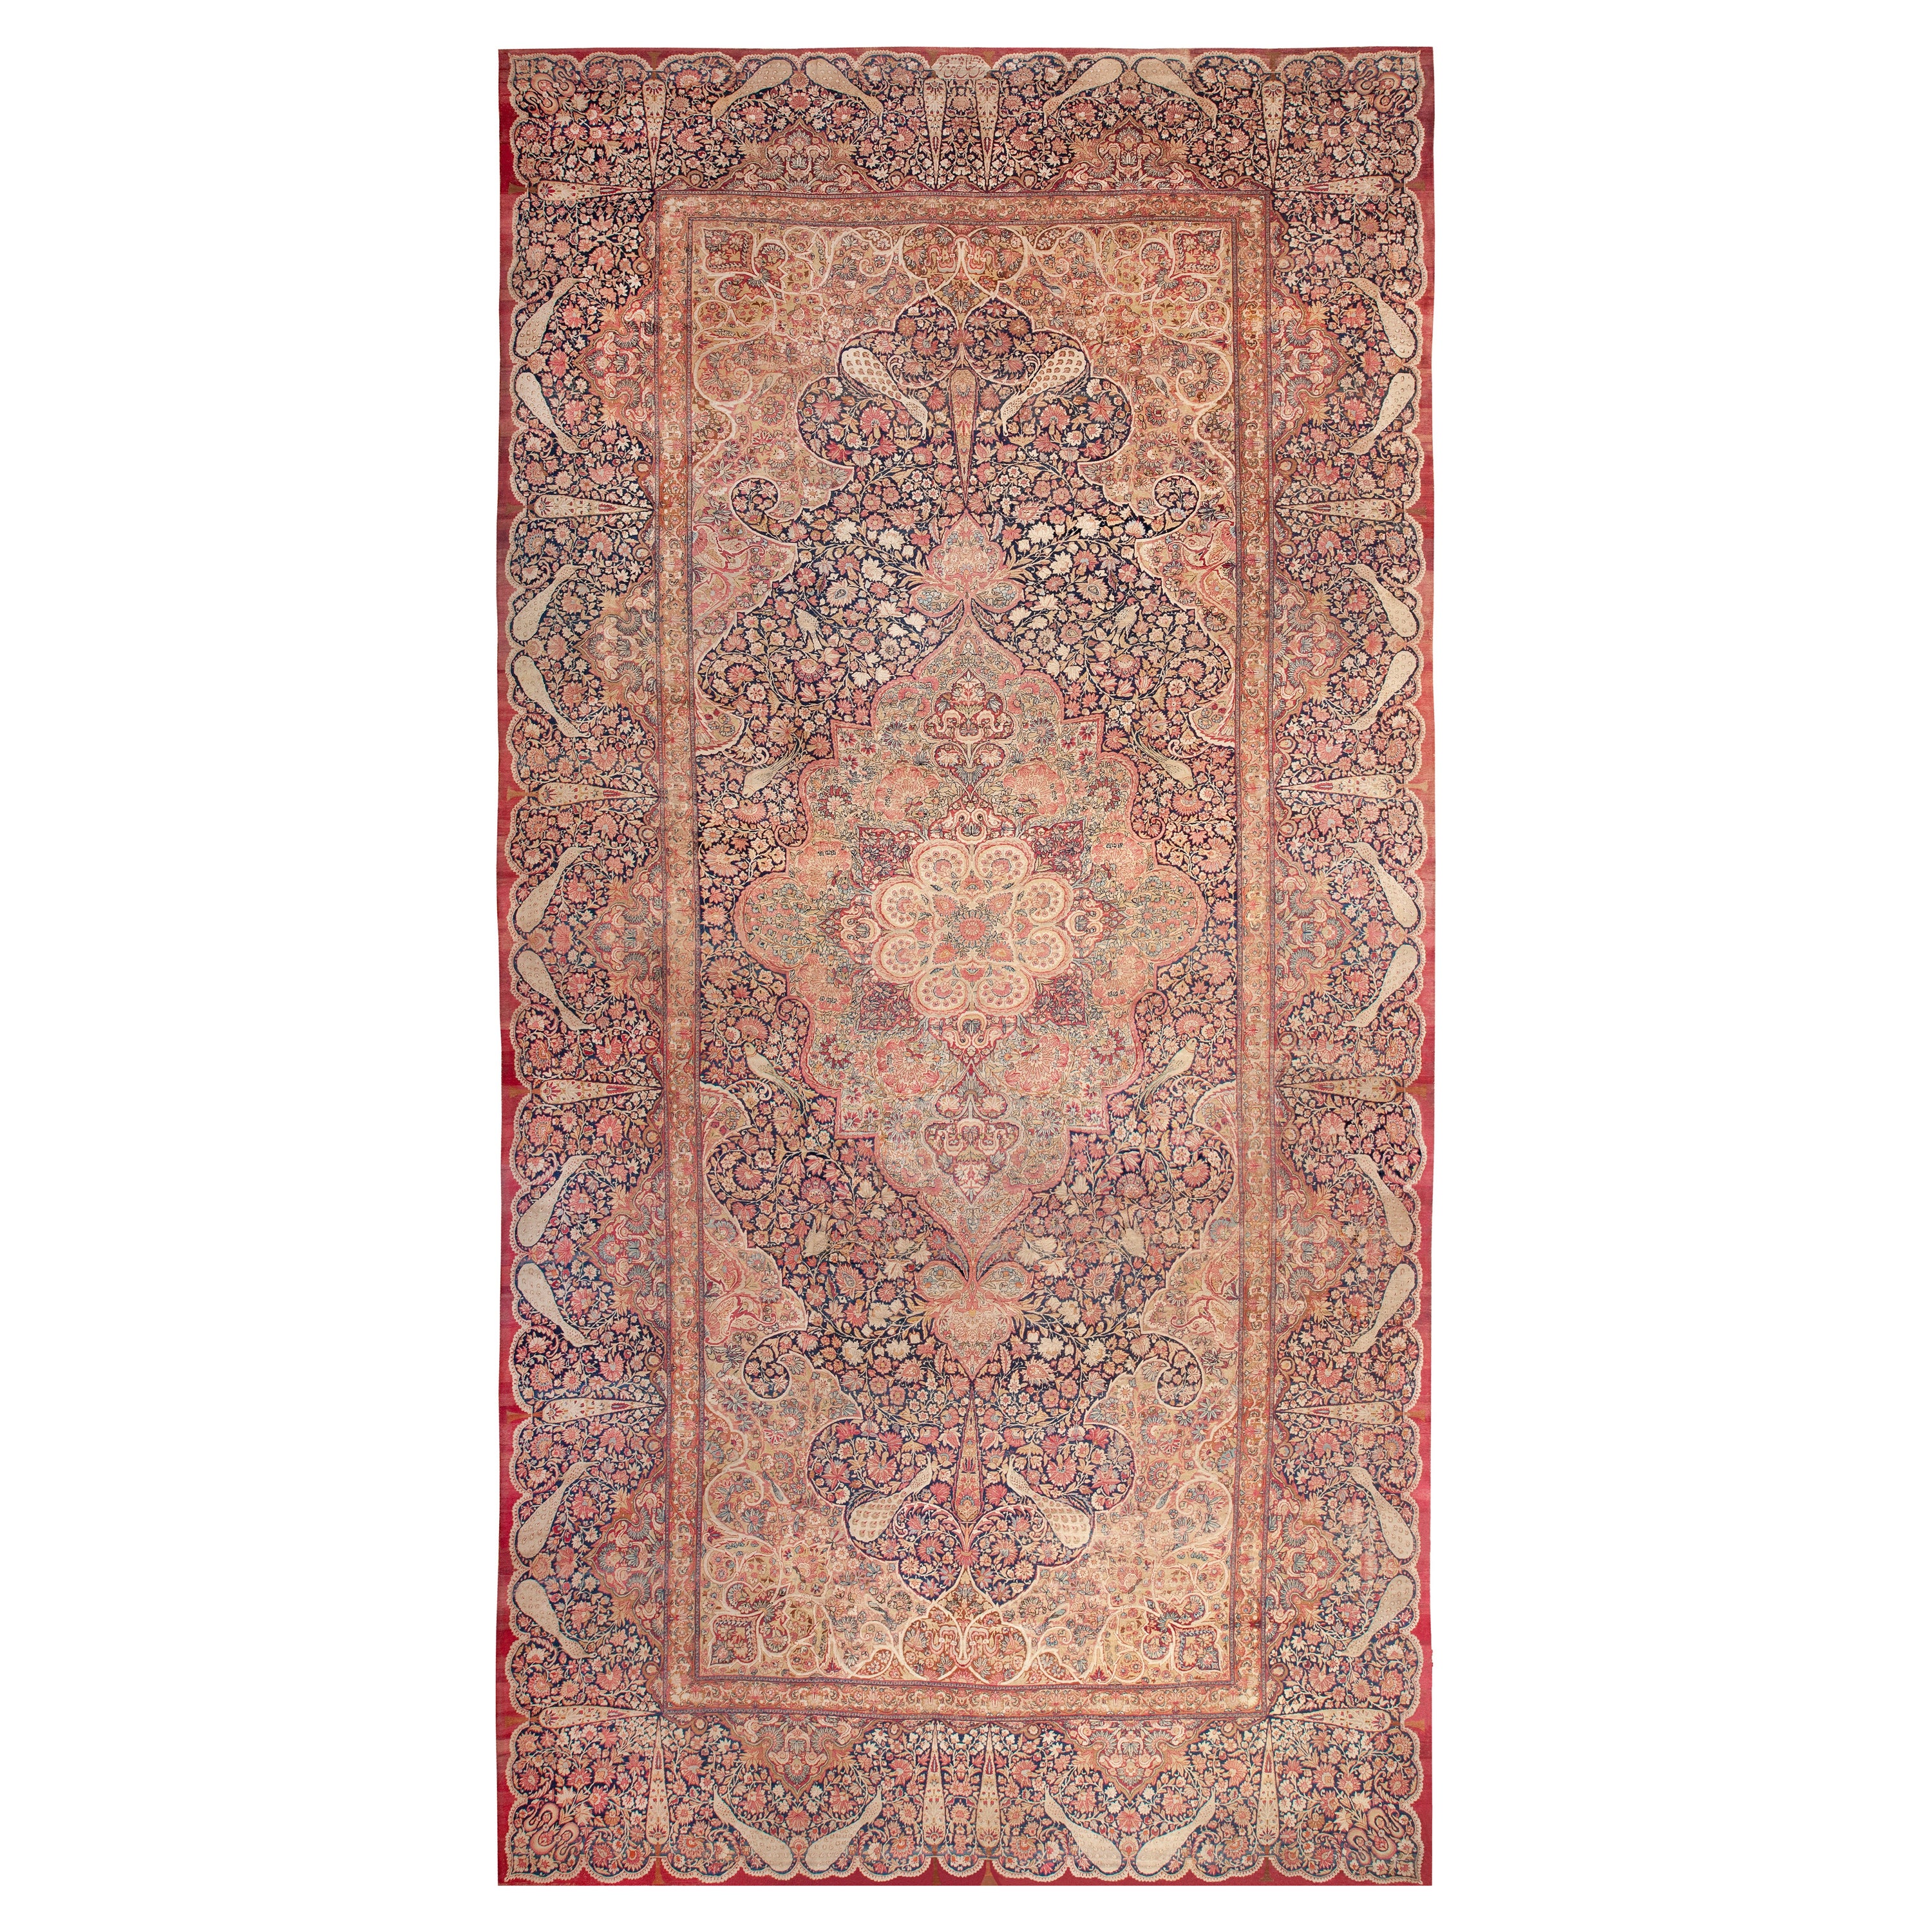 Fine And Beautiful Floral Animal Design Antique Persian Kerman Rug 14'3" x 29'8" For Sale